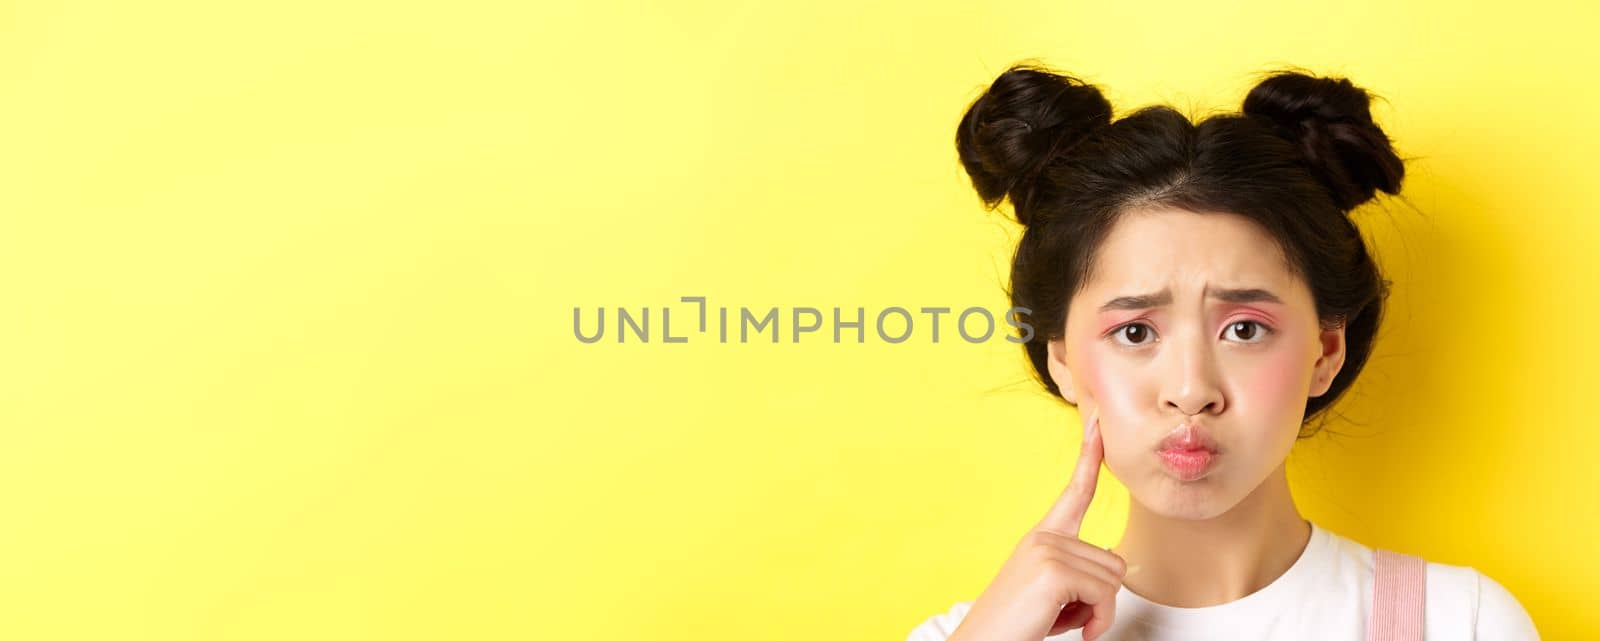 Close-up portrait of stylish asian girl with bright makeup and glowing skin, pouting and frowning, poking her cheek with sad face, standing upset on yellow background.